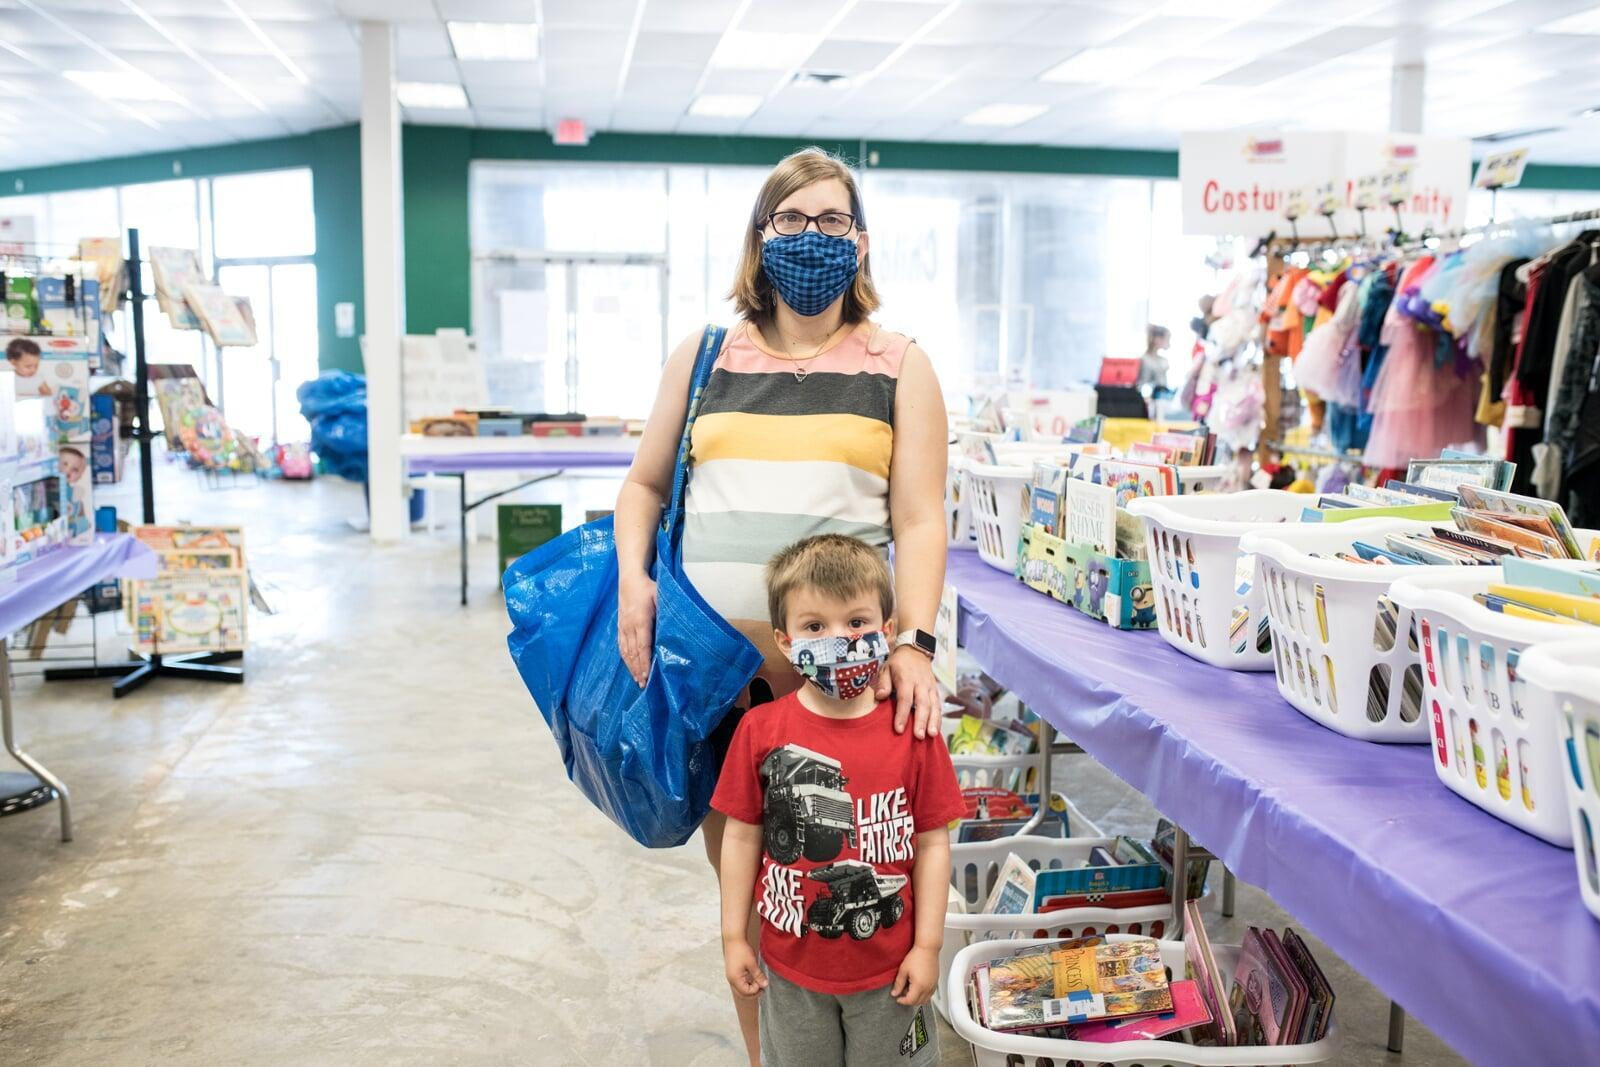 A mom and her four-year-old son stand with their masks and shopping bag in front of baskets of books and costumes.